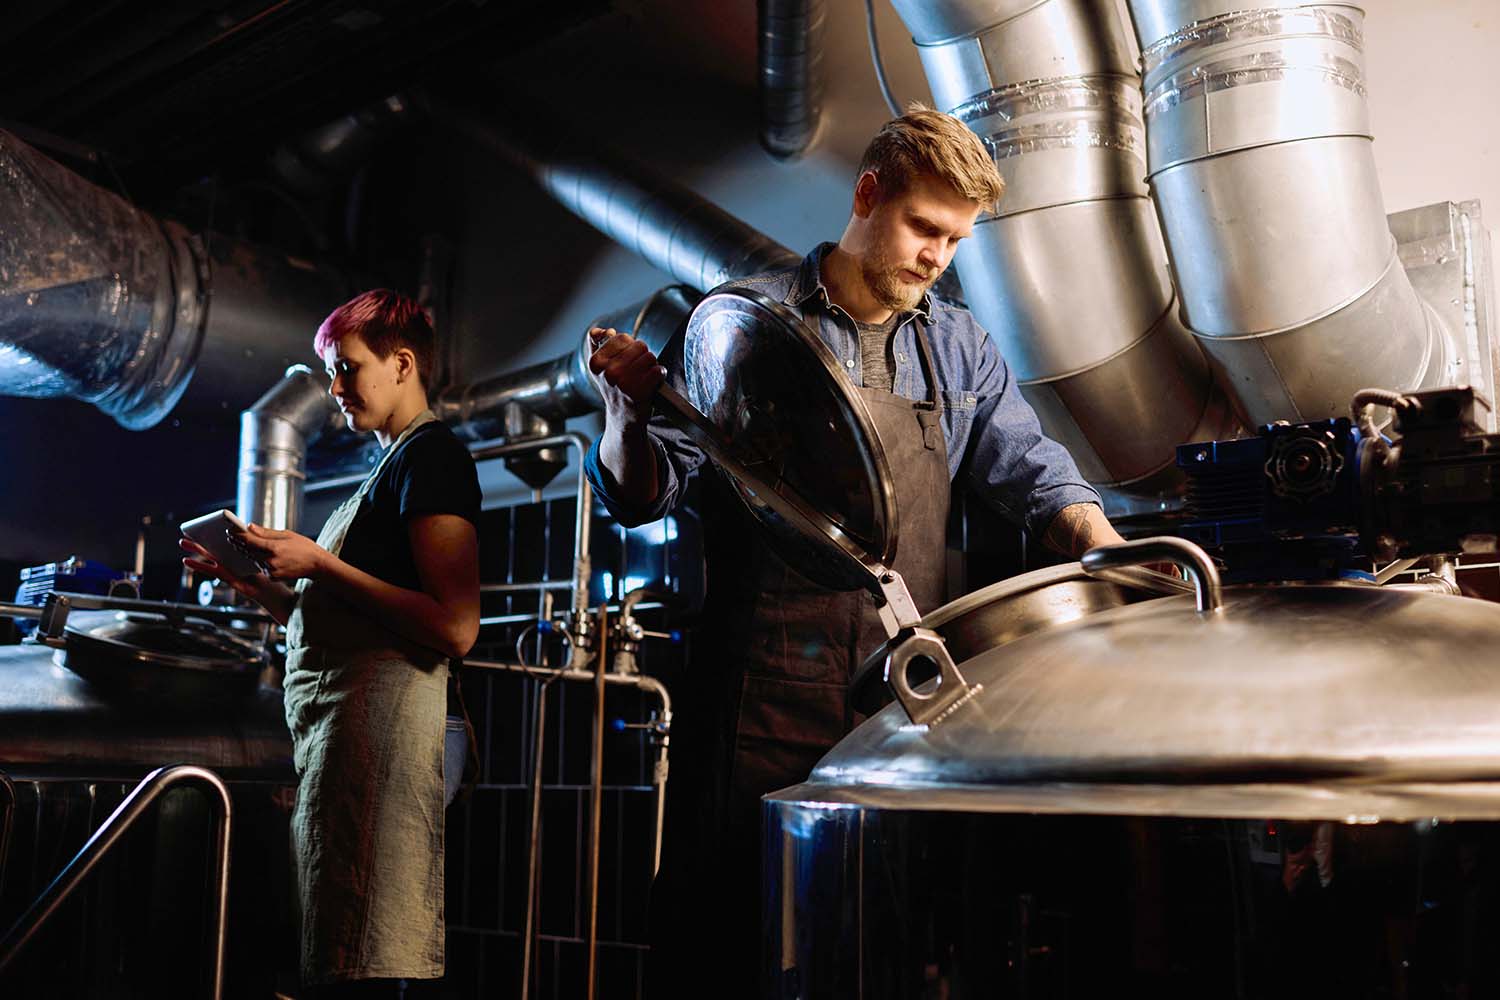 The Art and Science of Beer Production